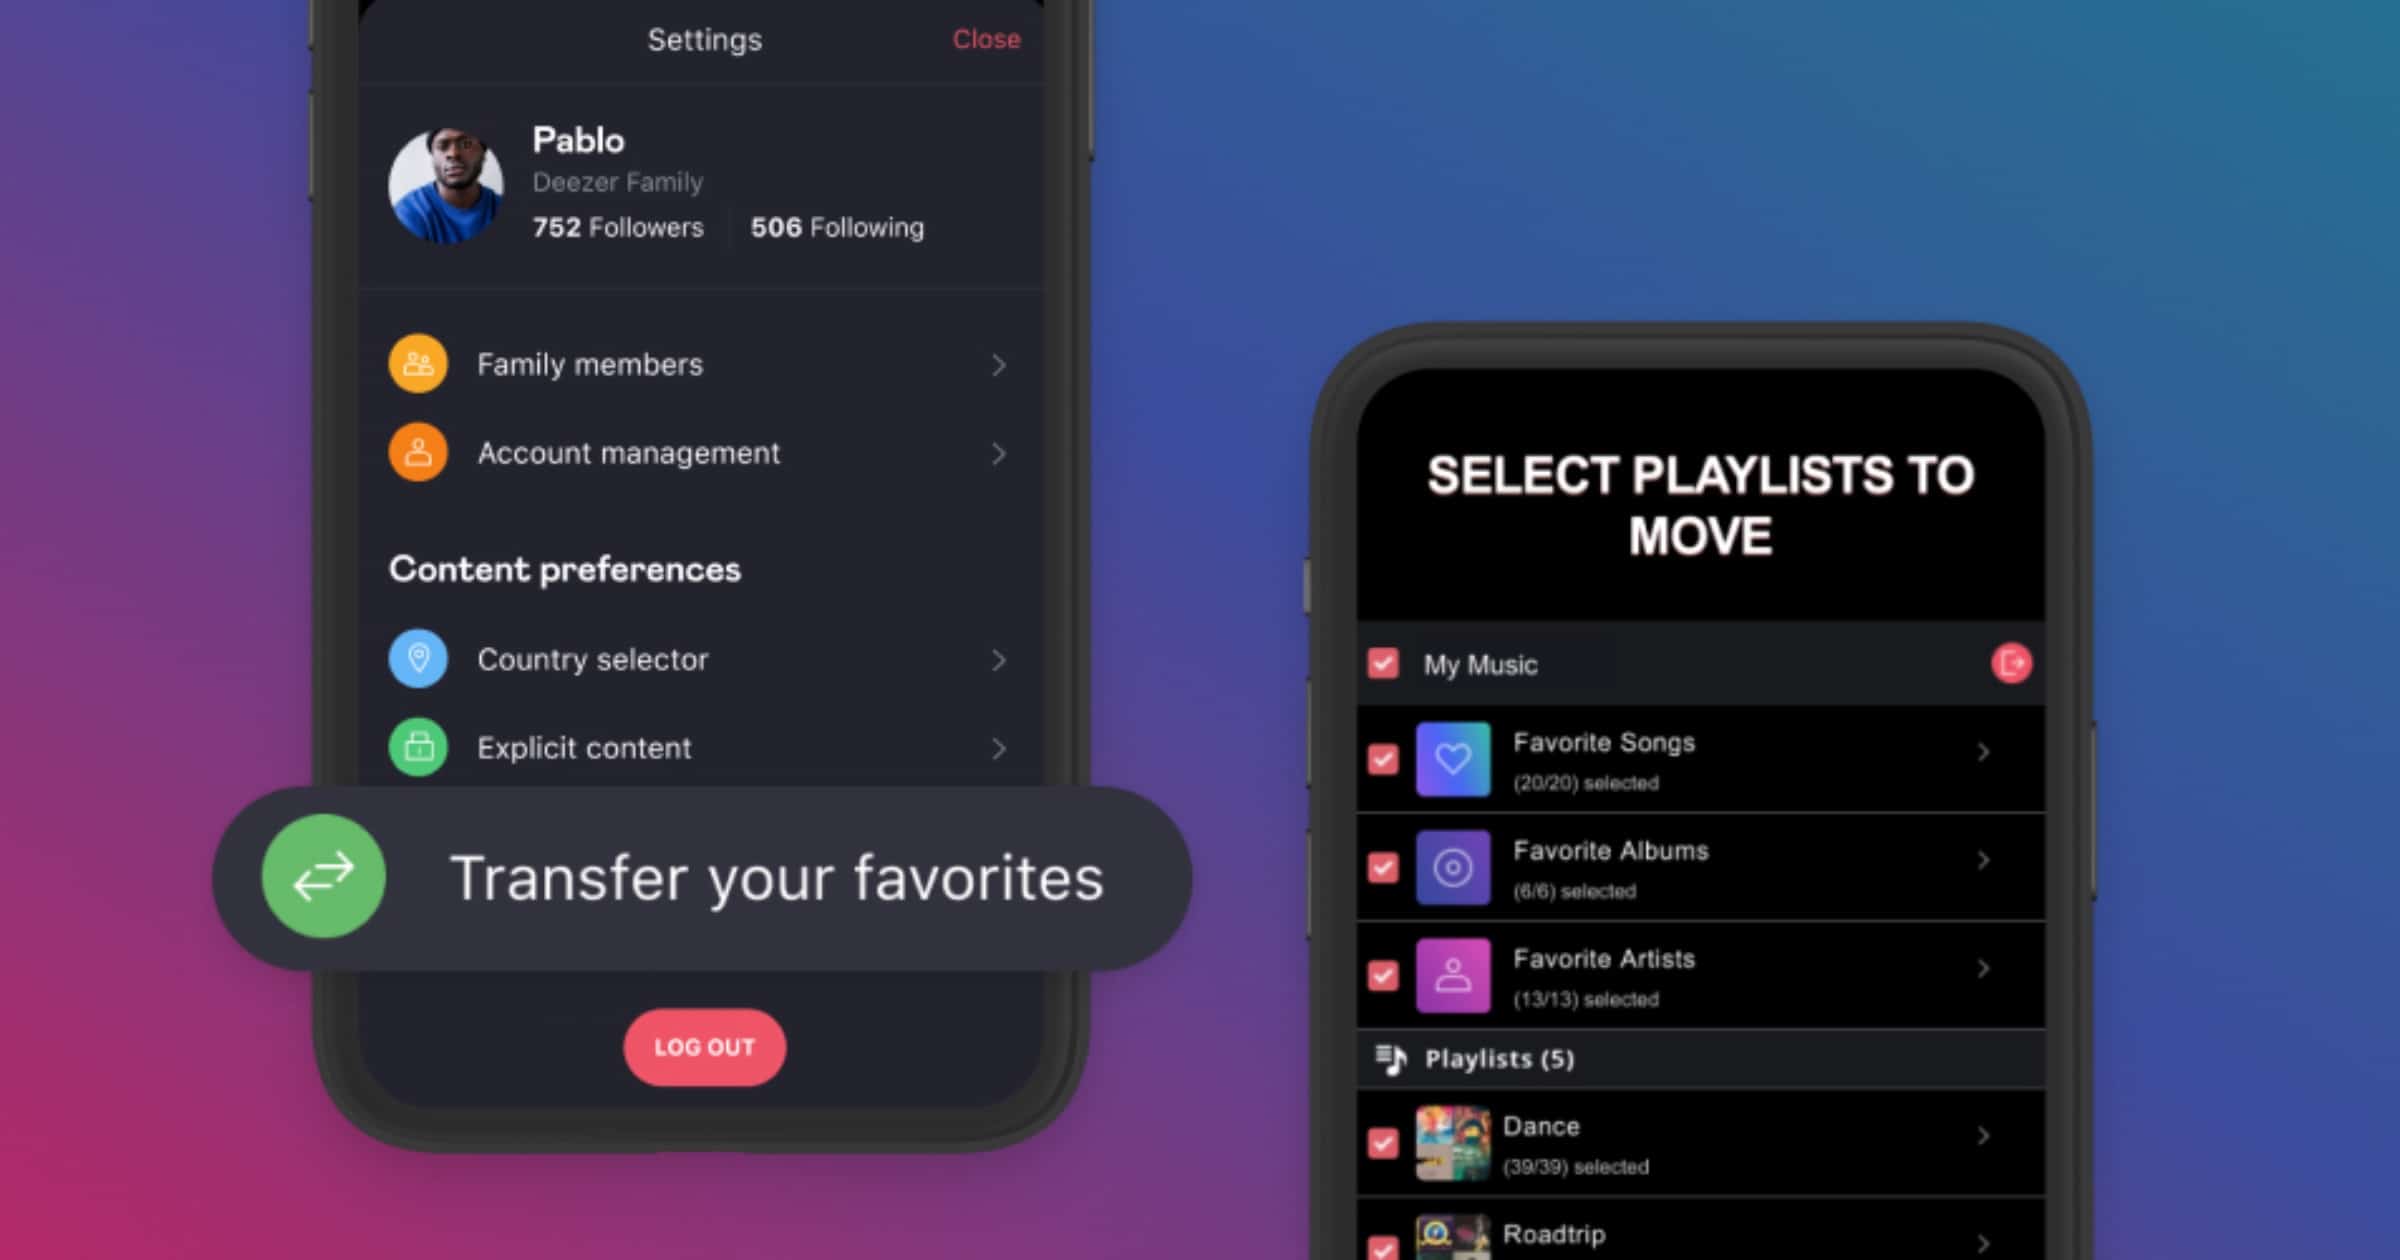 Users Can Now Import Their Music Library Into Deezer From Other Services